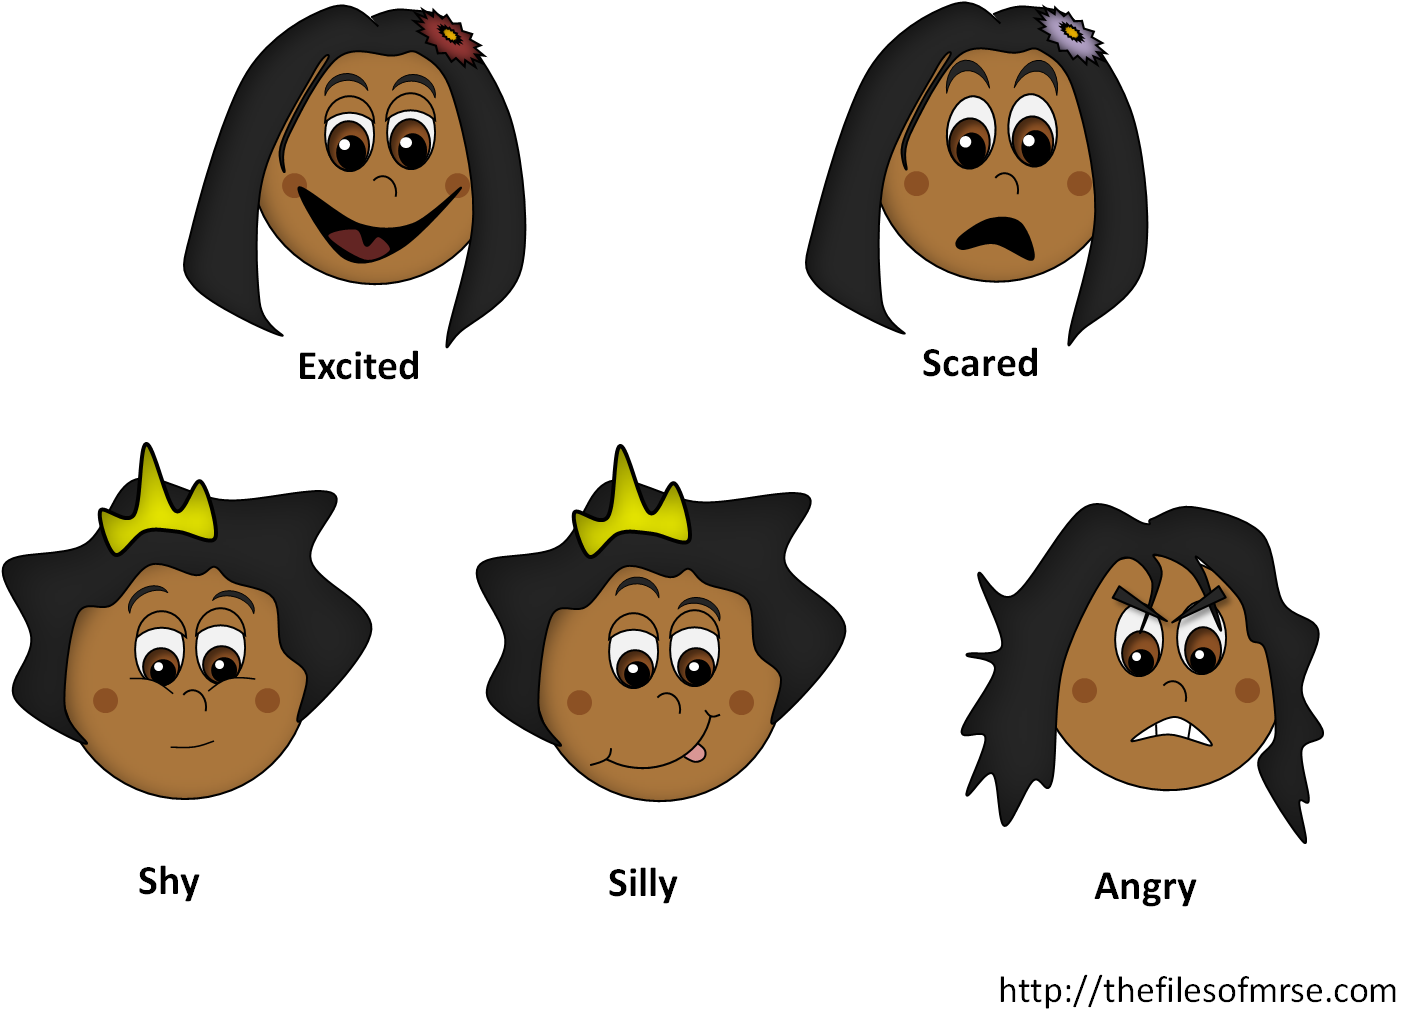 Free emotions clip art from m